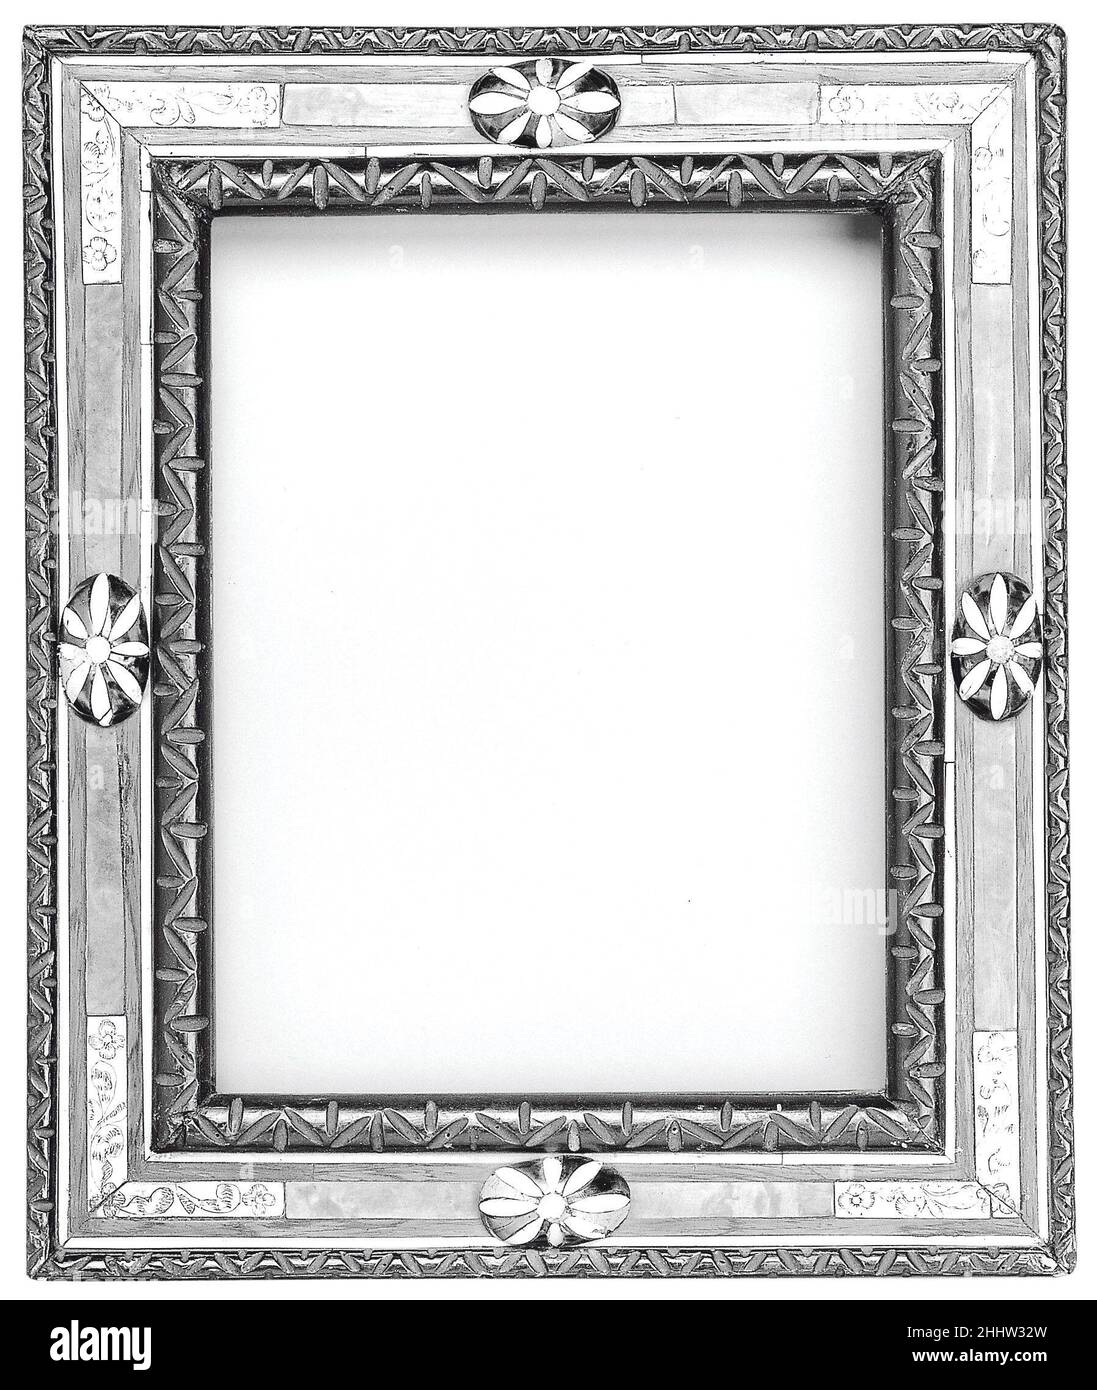 Cassetta frame early 20th century American, New York (?). Cassetta frame. American, New York (?). early 20th century. Basswood back frame with rosewood upper moldings and ivory, tortoiseshell, oak and maple veneers. Carved. Sight edge: simplified lotus leaf, ebonized. Frieze: ivory stringing, maple and oak veneer. Centers: oval bosses with ivory and tortoiseshell veneer. Corners: curled acanthus leaves and paterae engraved on ivory.. Frames Stock Photo